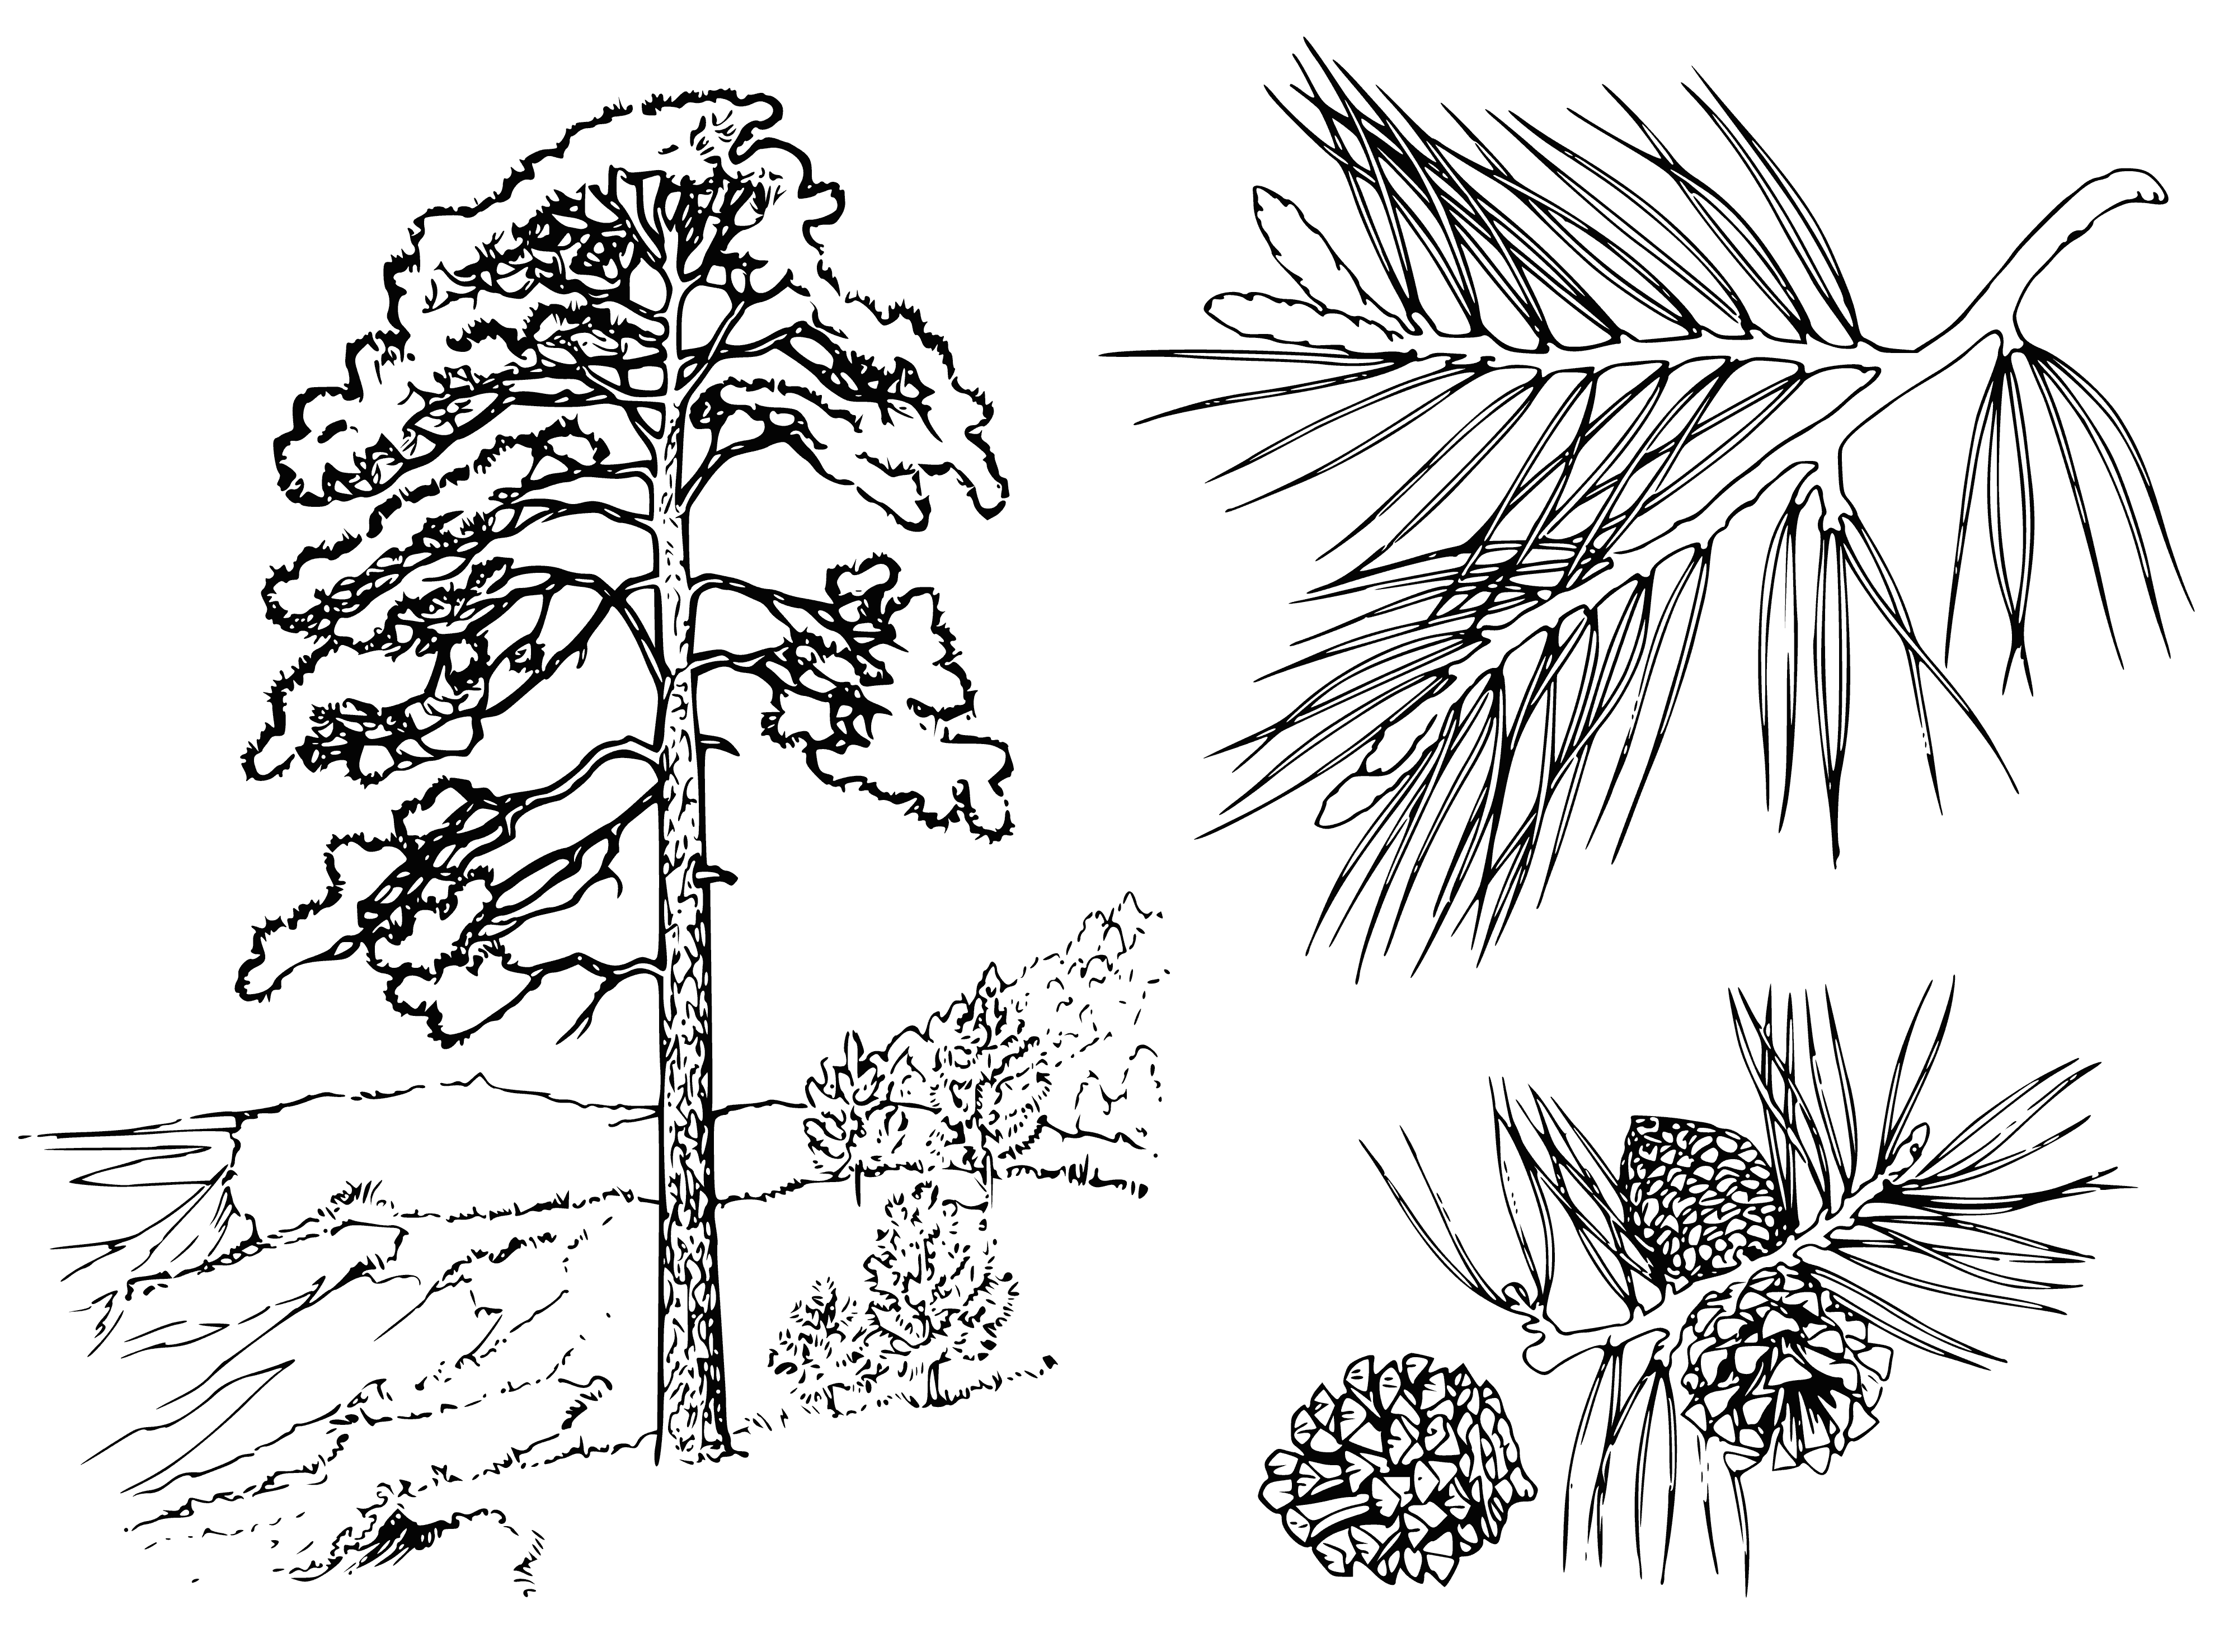 Pine tree coloring page